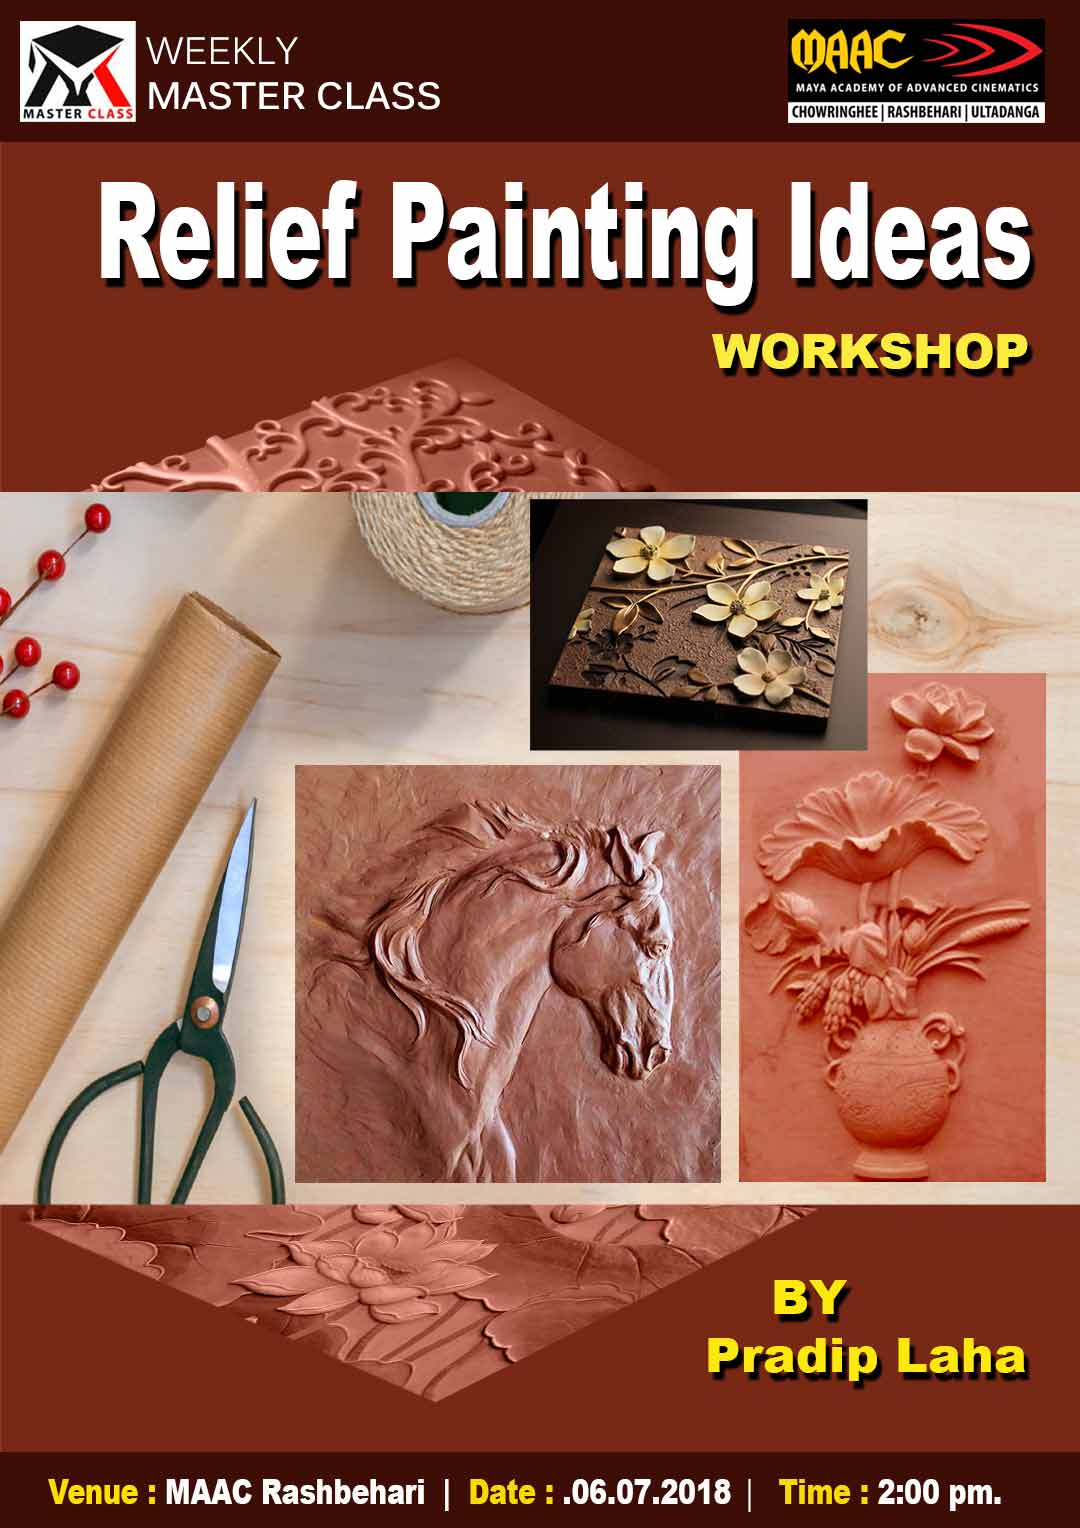 Weekly Master Class on Relief Painting Ideas